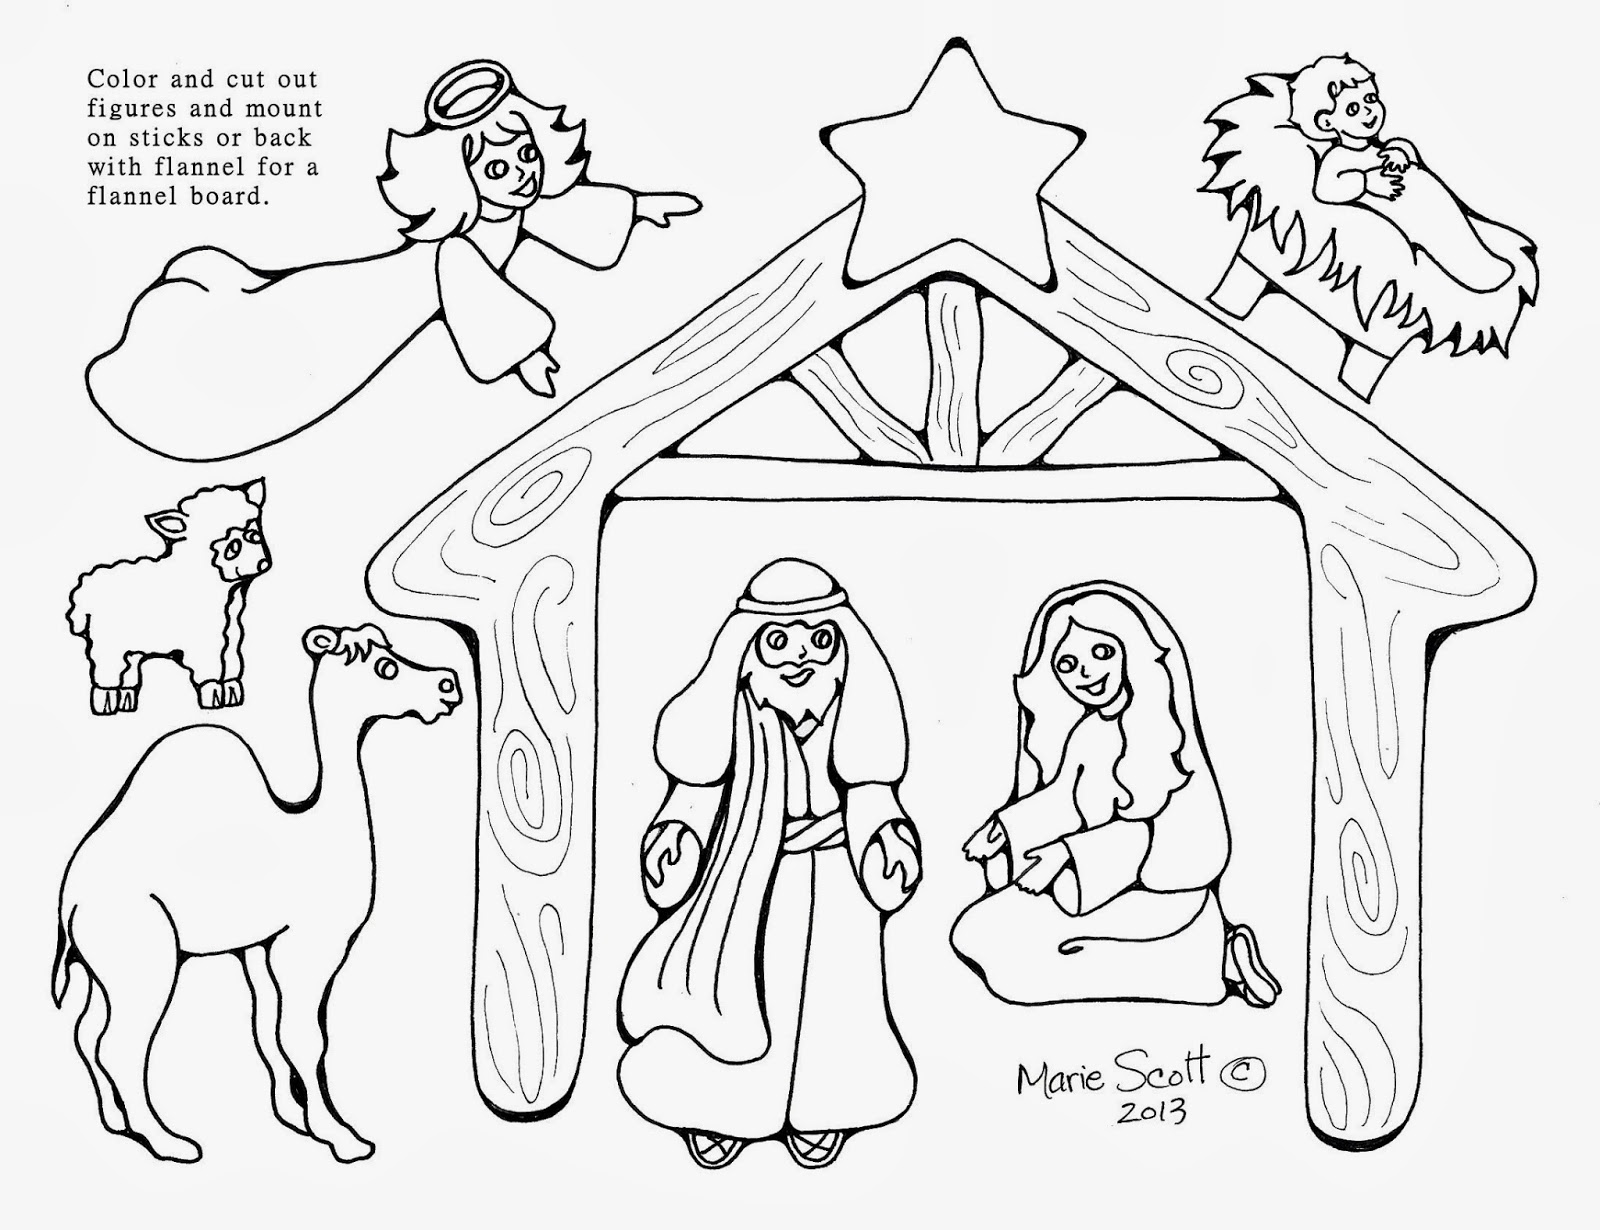 Nativity Characters Coloring Pages at GetDrawings Free download